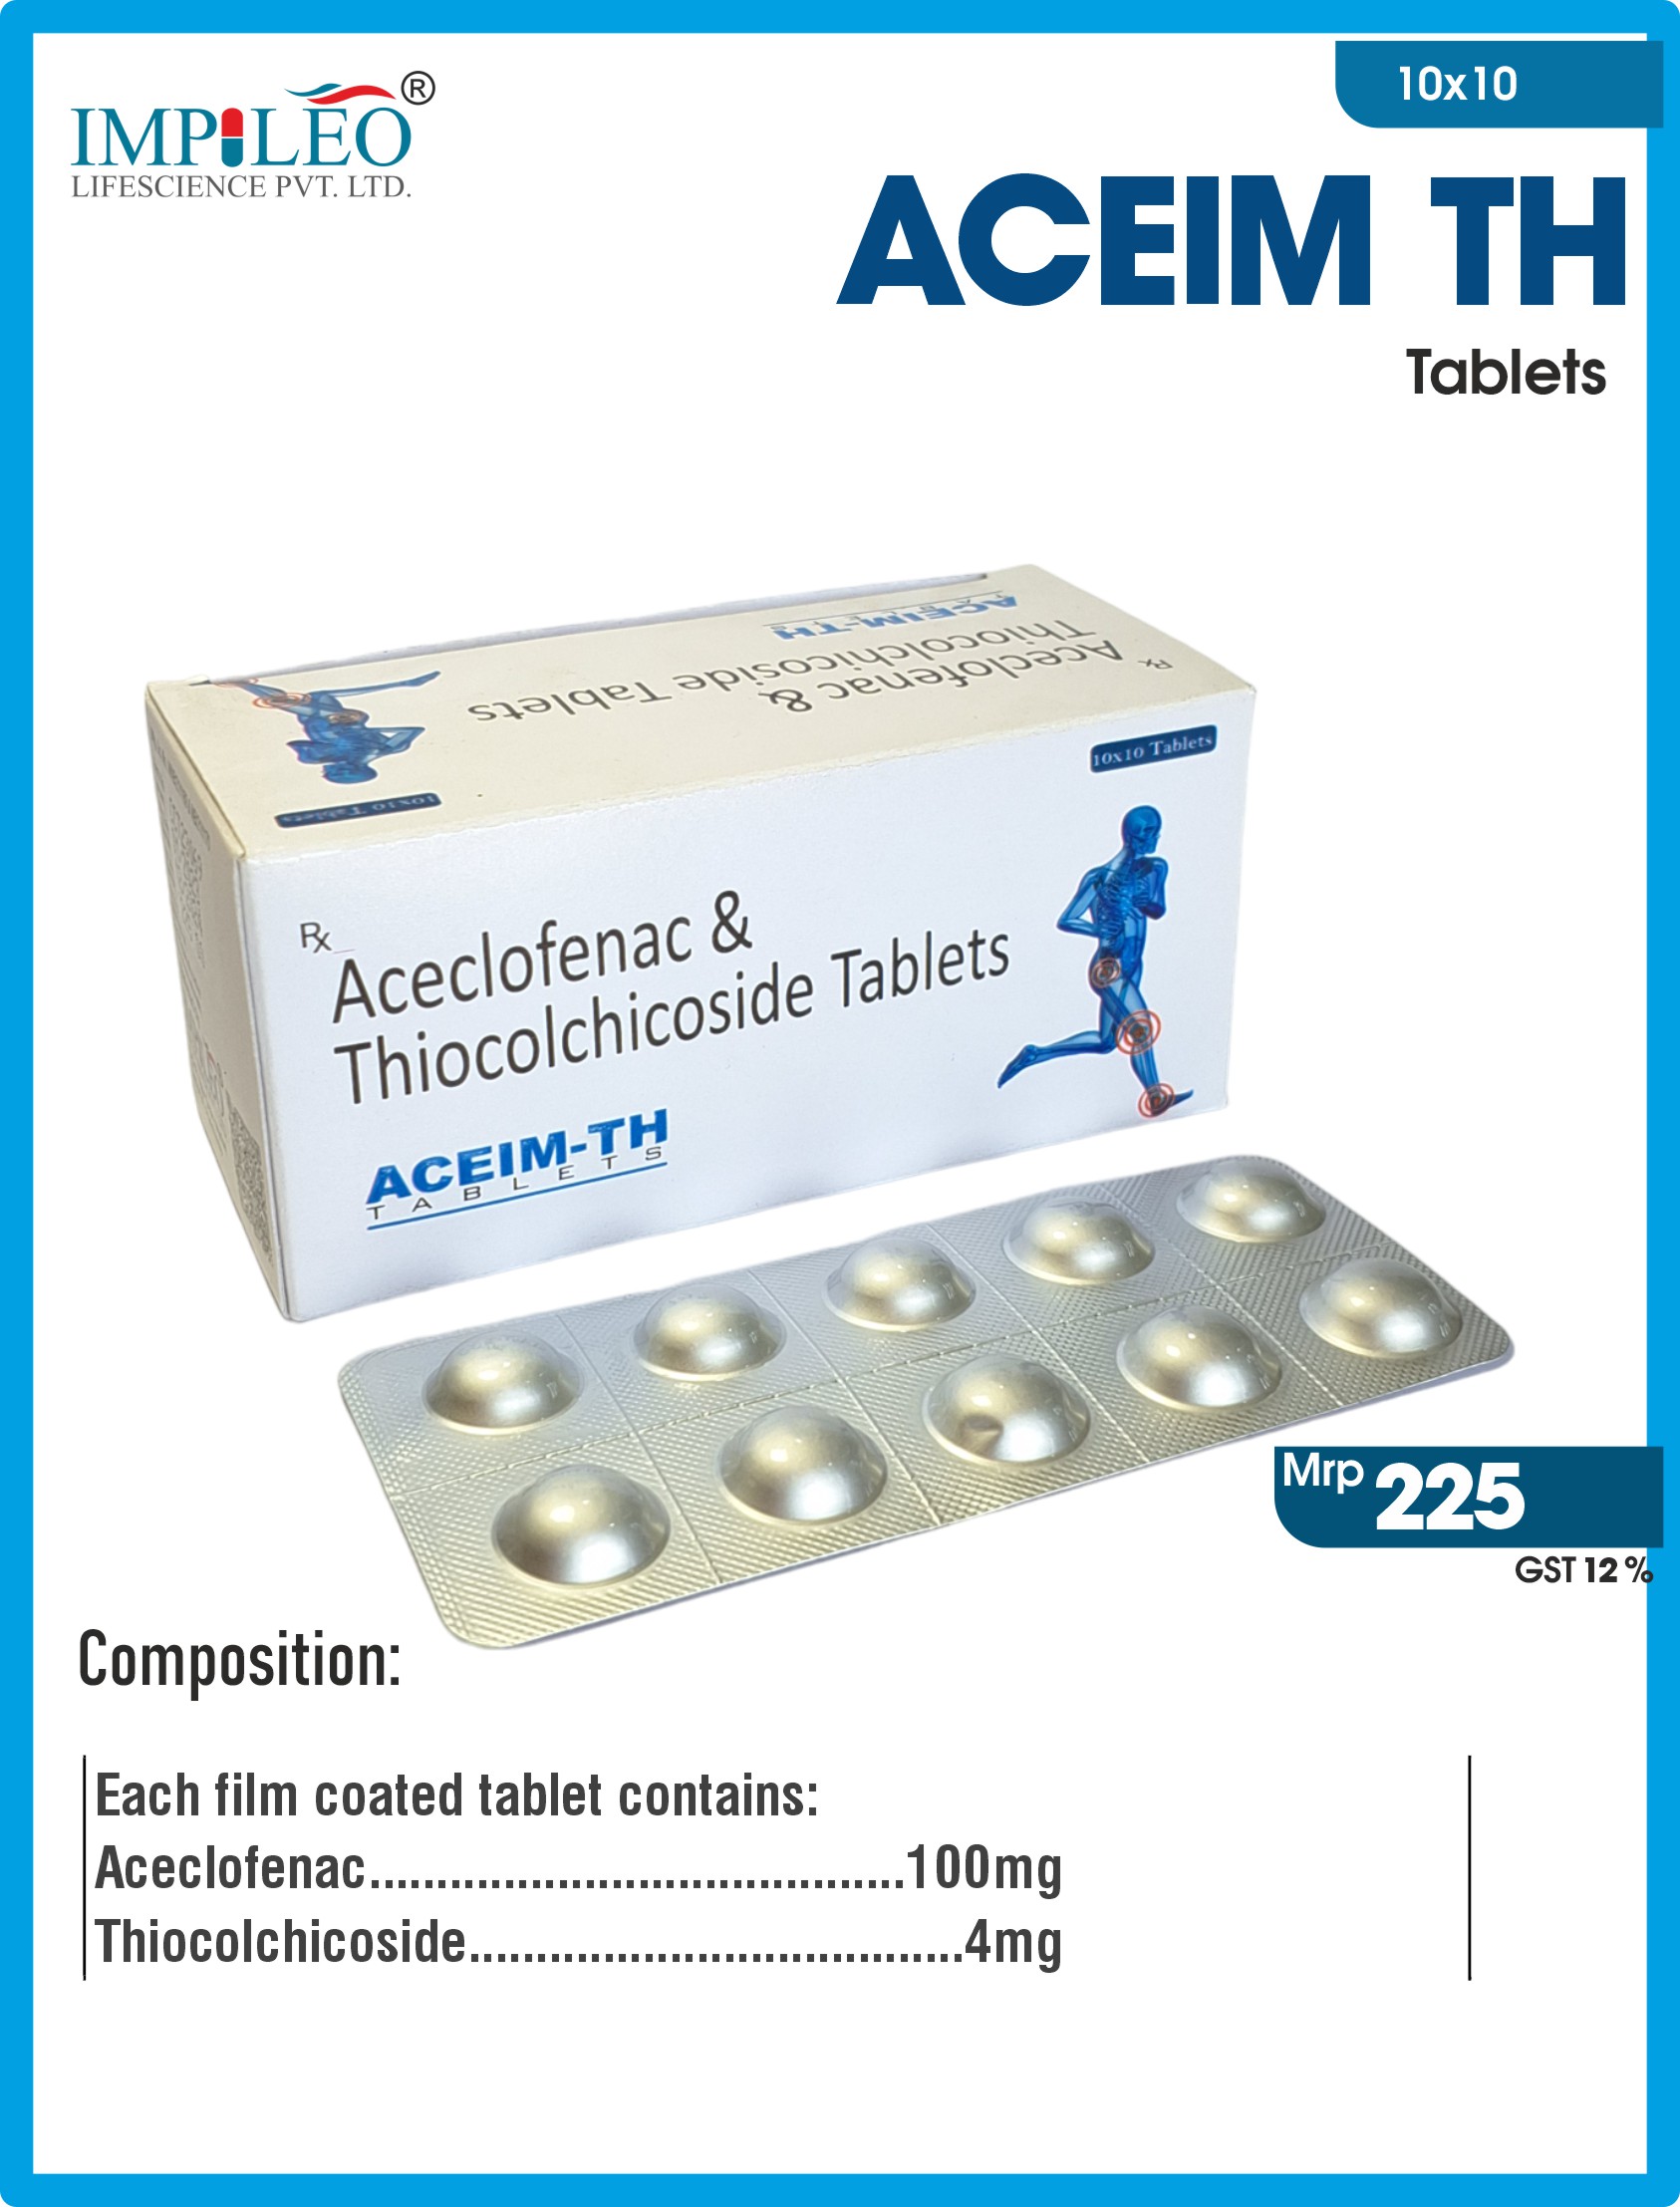 Trusted Third Party Manufacturer in India Provides ACEIM TH (Aceclofenac and Thiocolchicoside) Tablets.